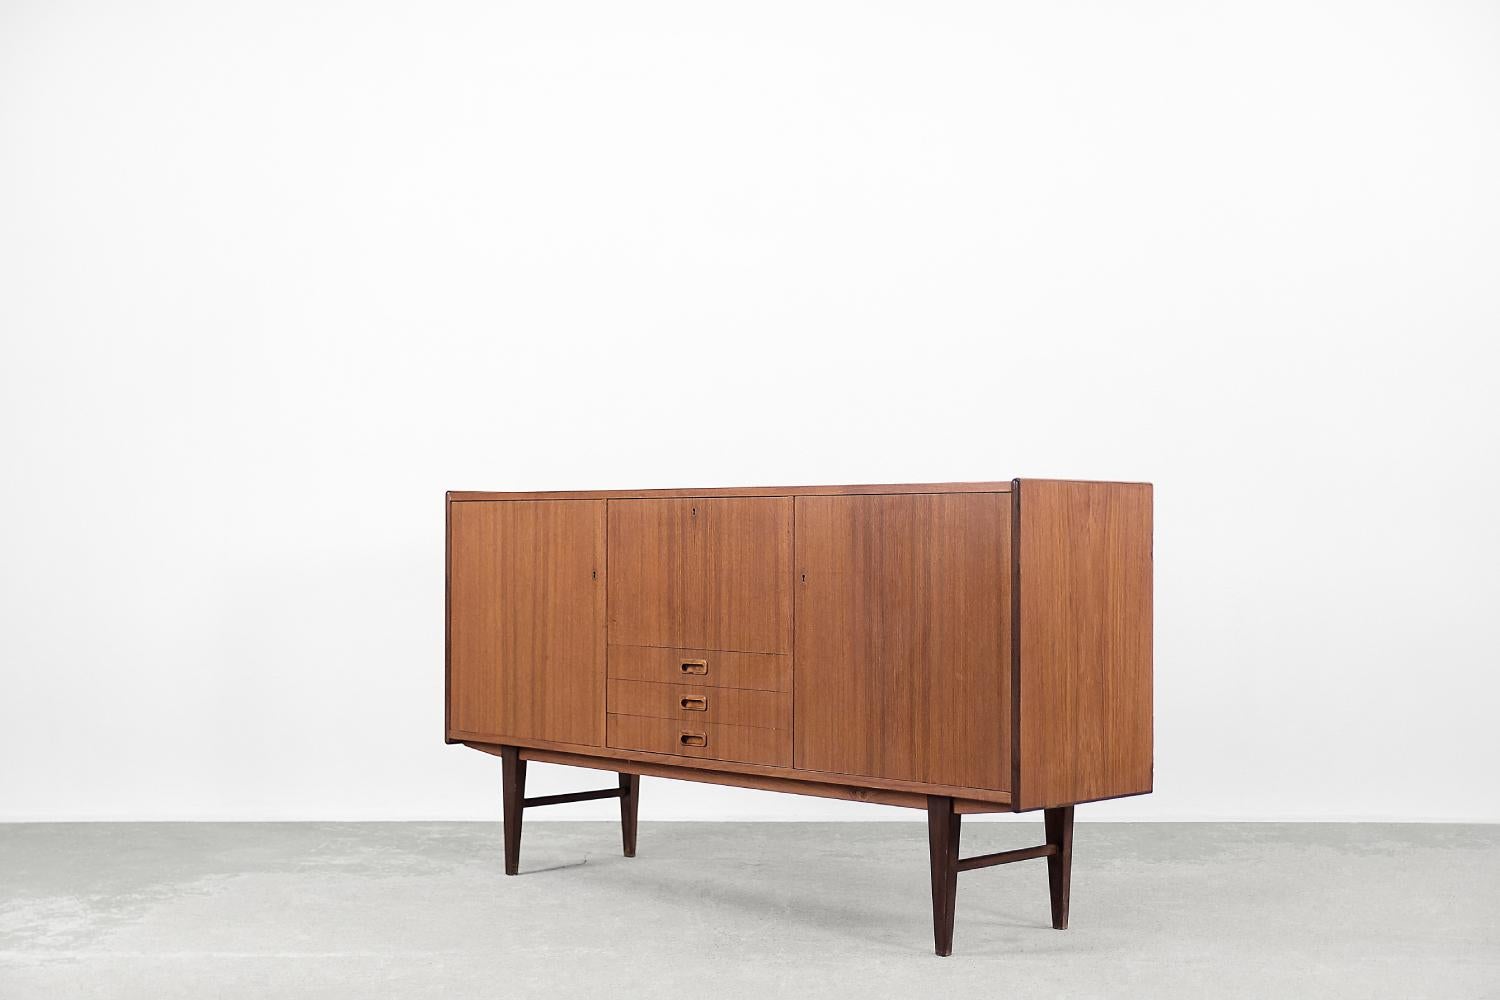 Vintage Scandinavian Modern Classic Teak Wood High Sideboard with Drawers, 1960s In Good Condition For Sale In Warszawa, Mazowieckie